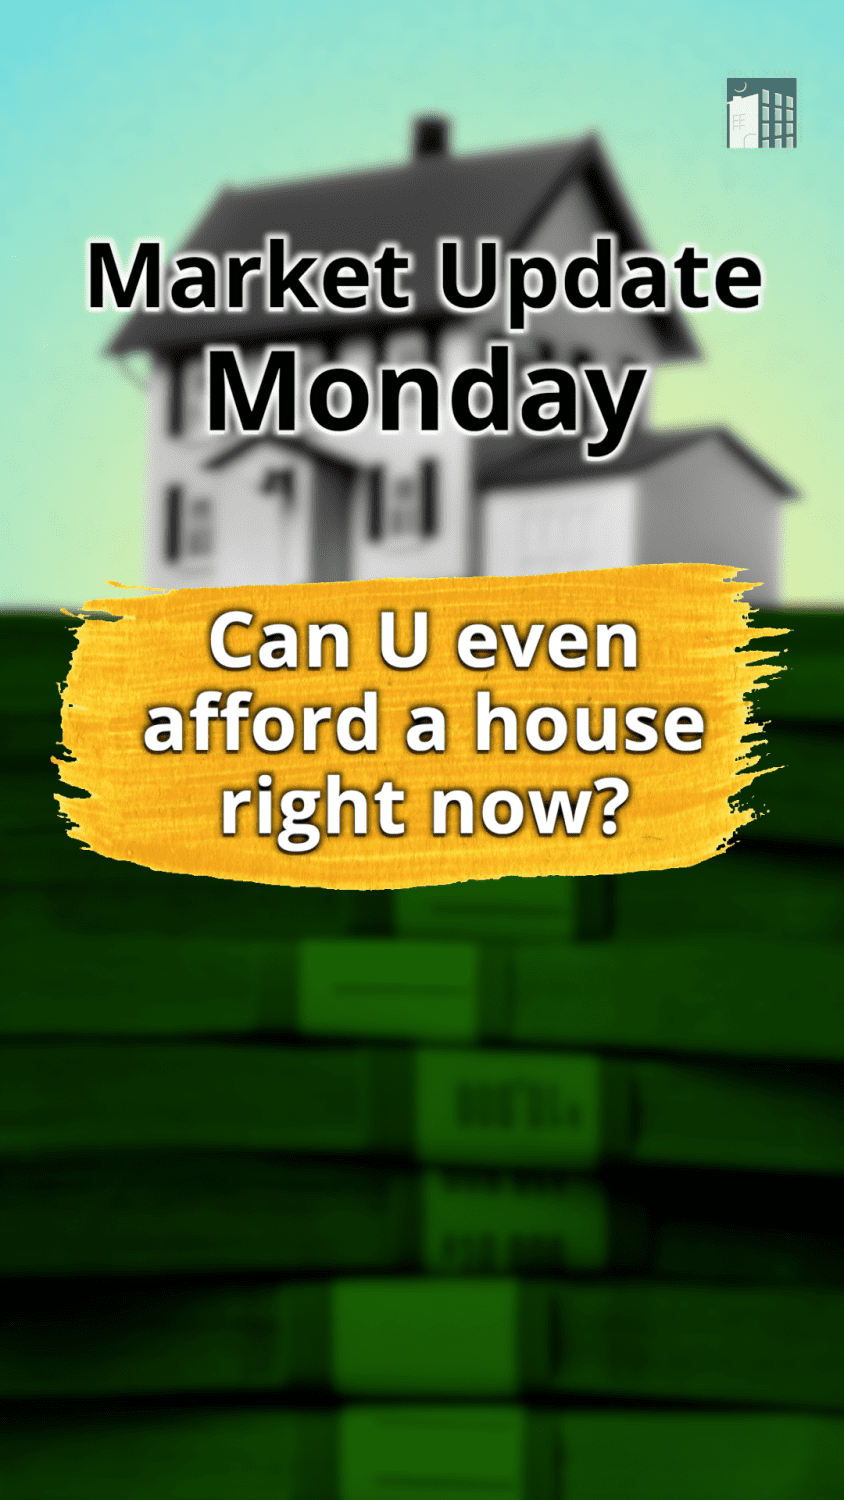 01 Market Update Monday 59 - Can you even afford a house right now